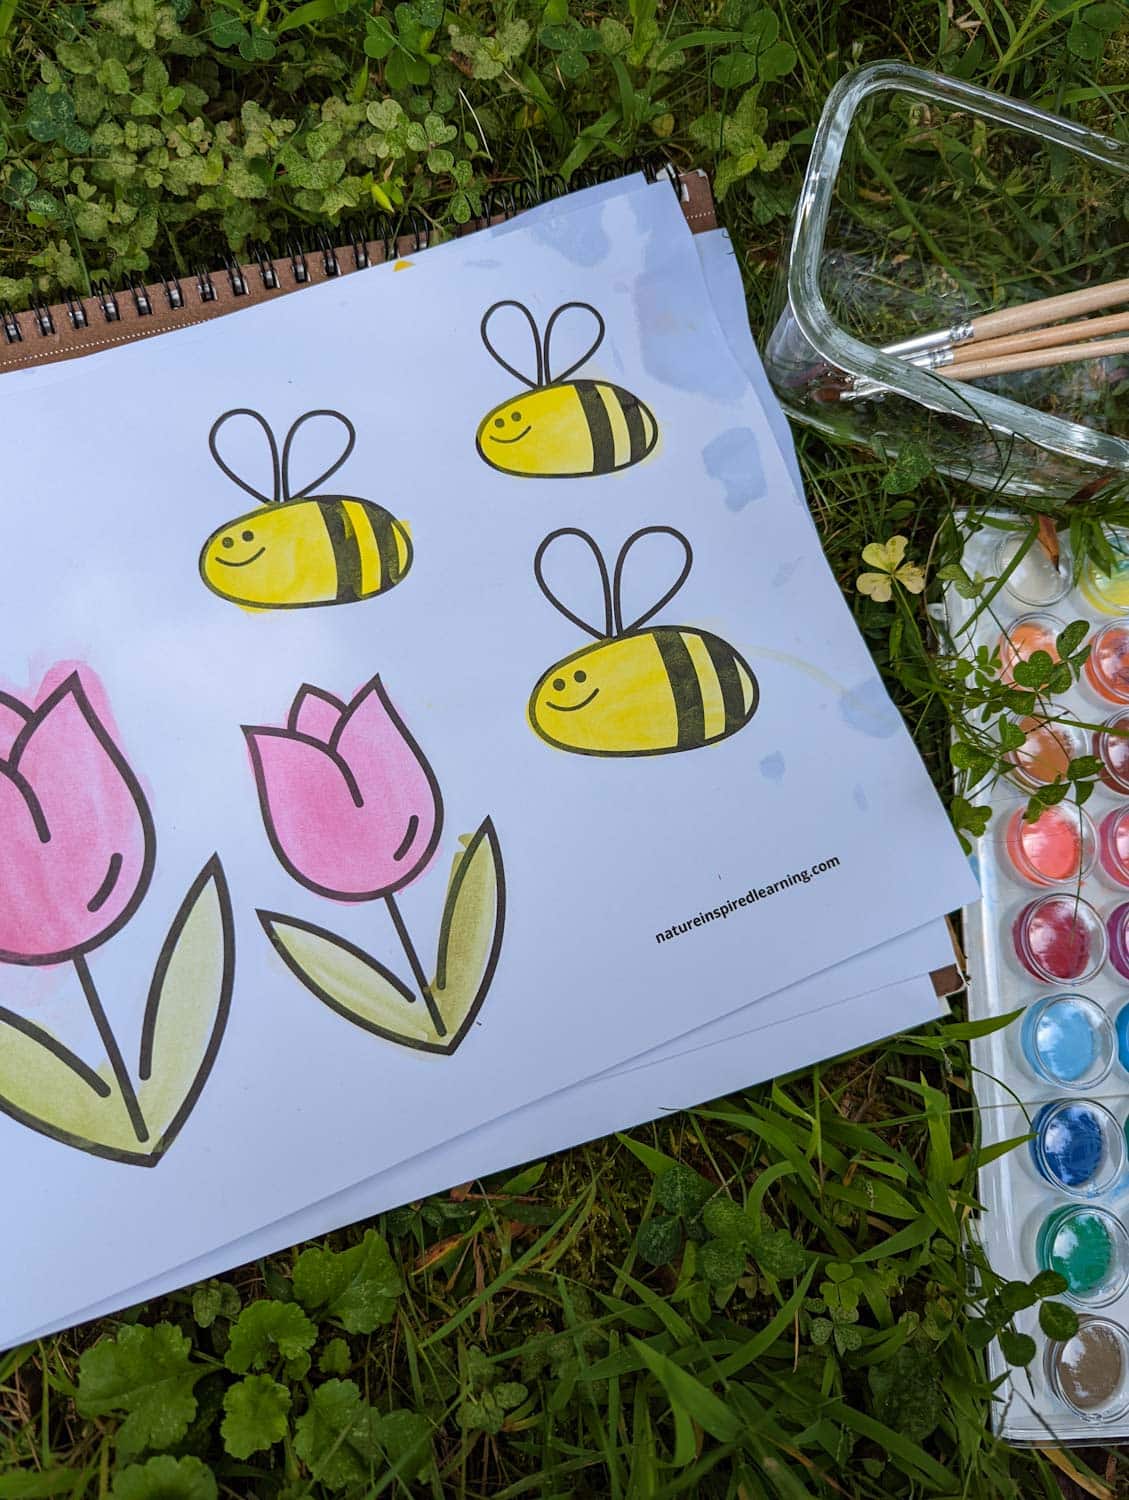 coloring page with three smiling bees with two tulips painted using watercolor paint outside in the grass with a glass with paint brushes and a watercolor paint set.